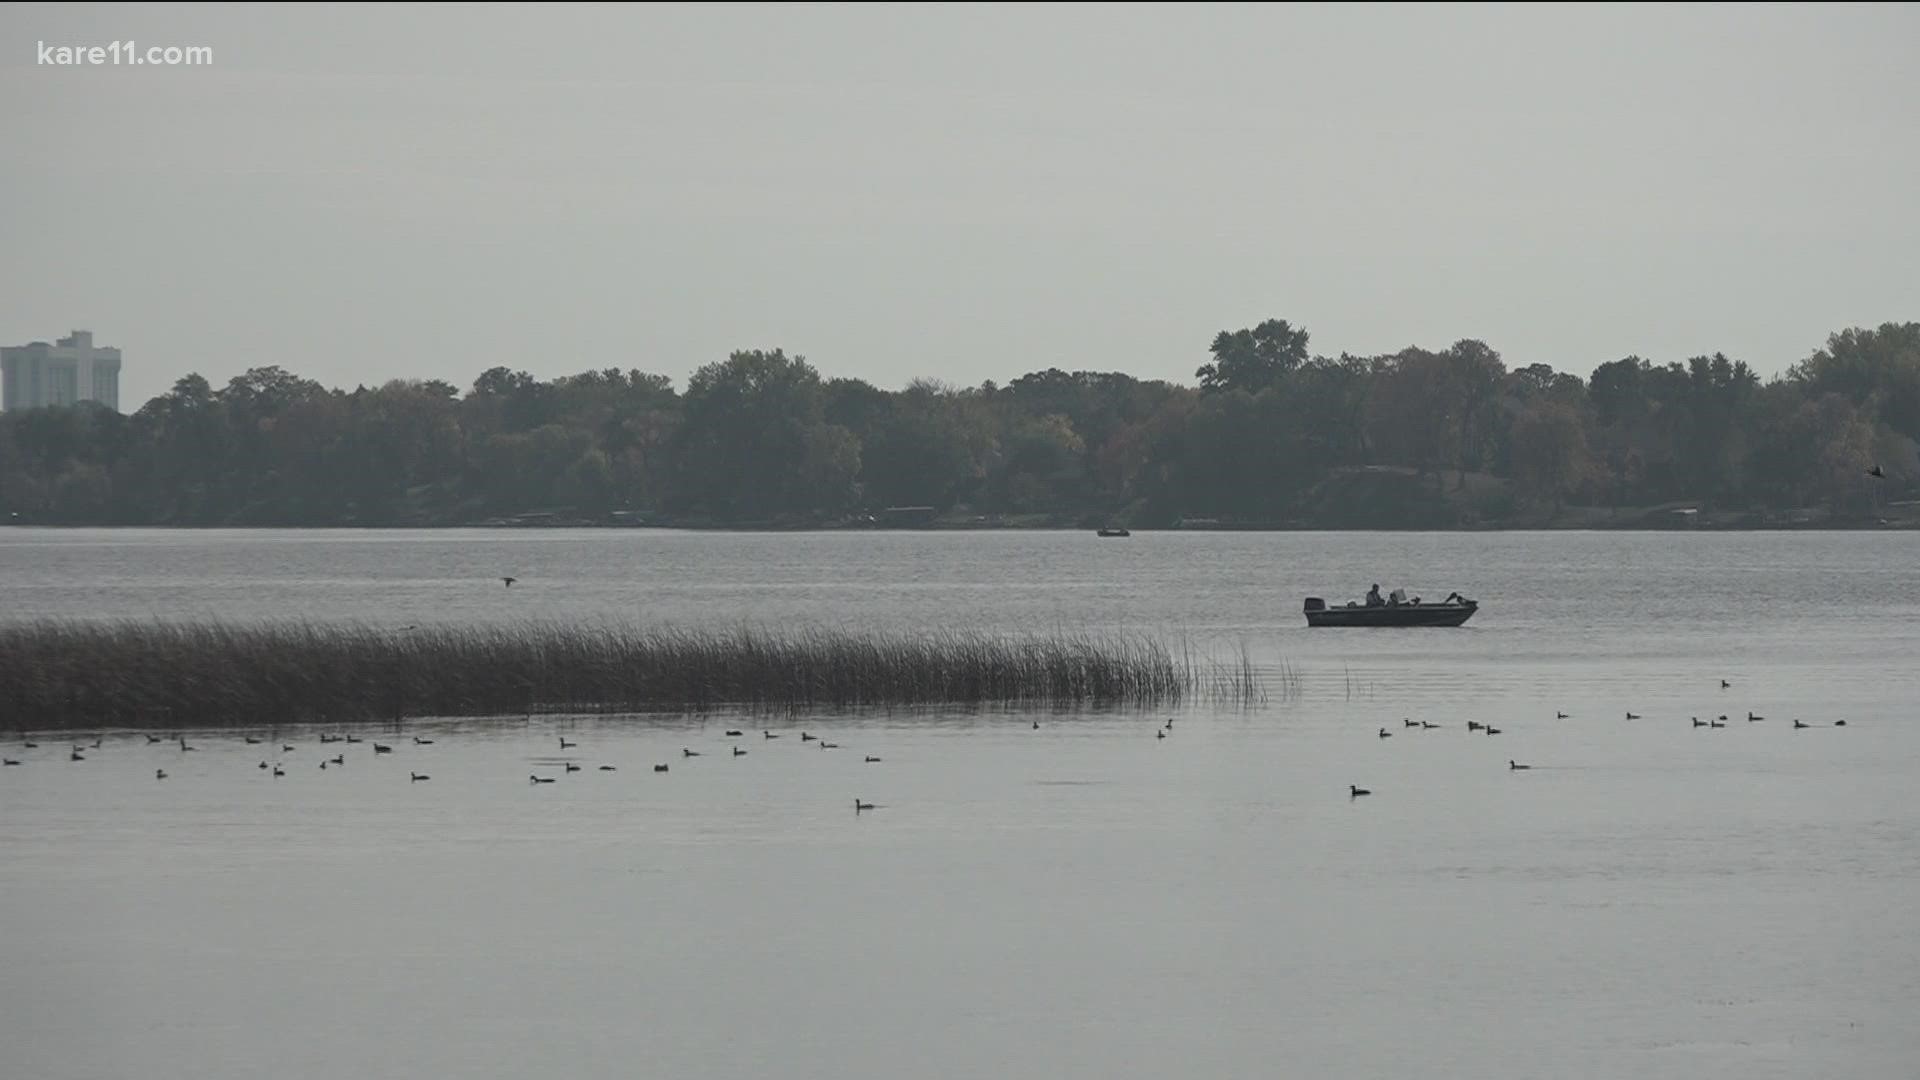 Meteorologist Ben Dery explains how lake turnover in autumn presents challenges for anglers.